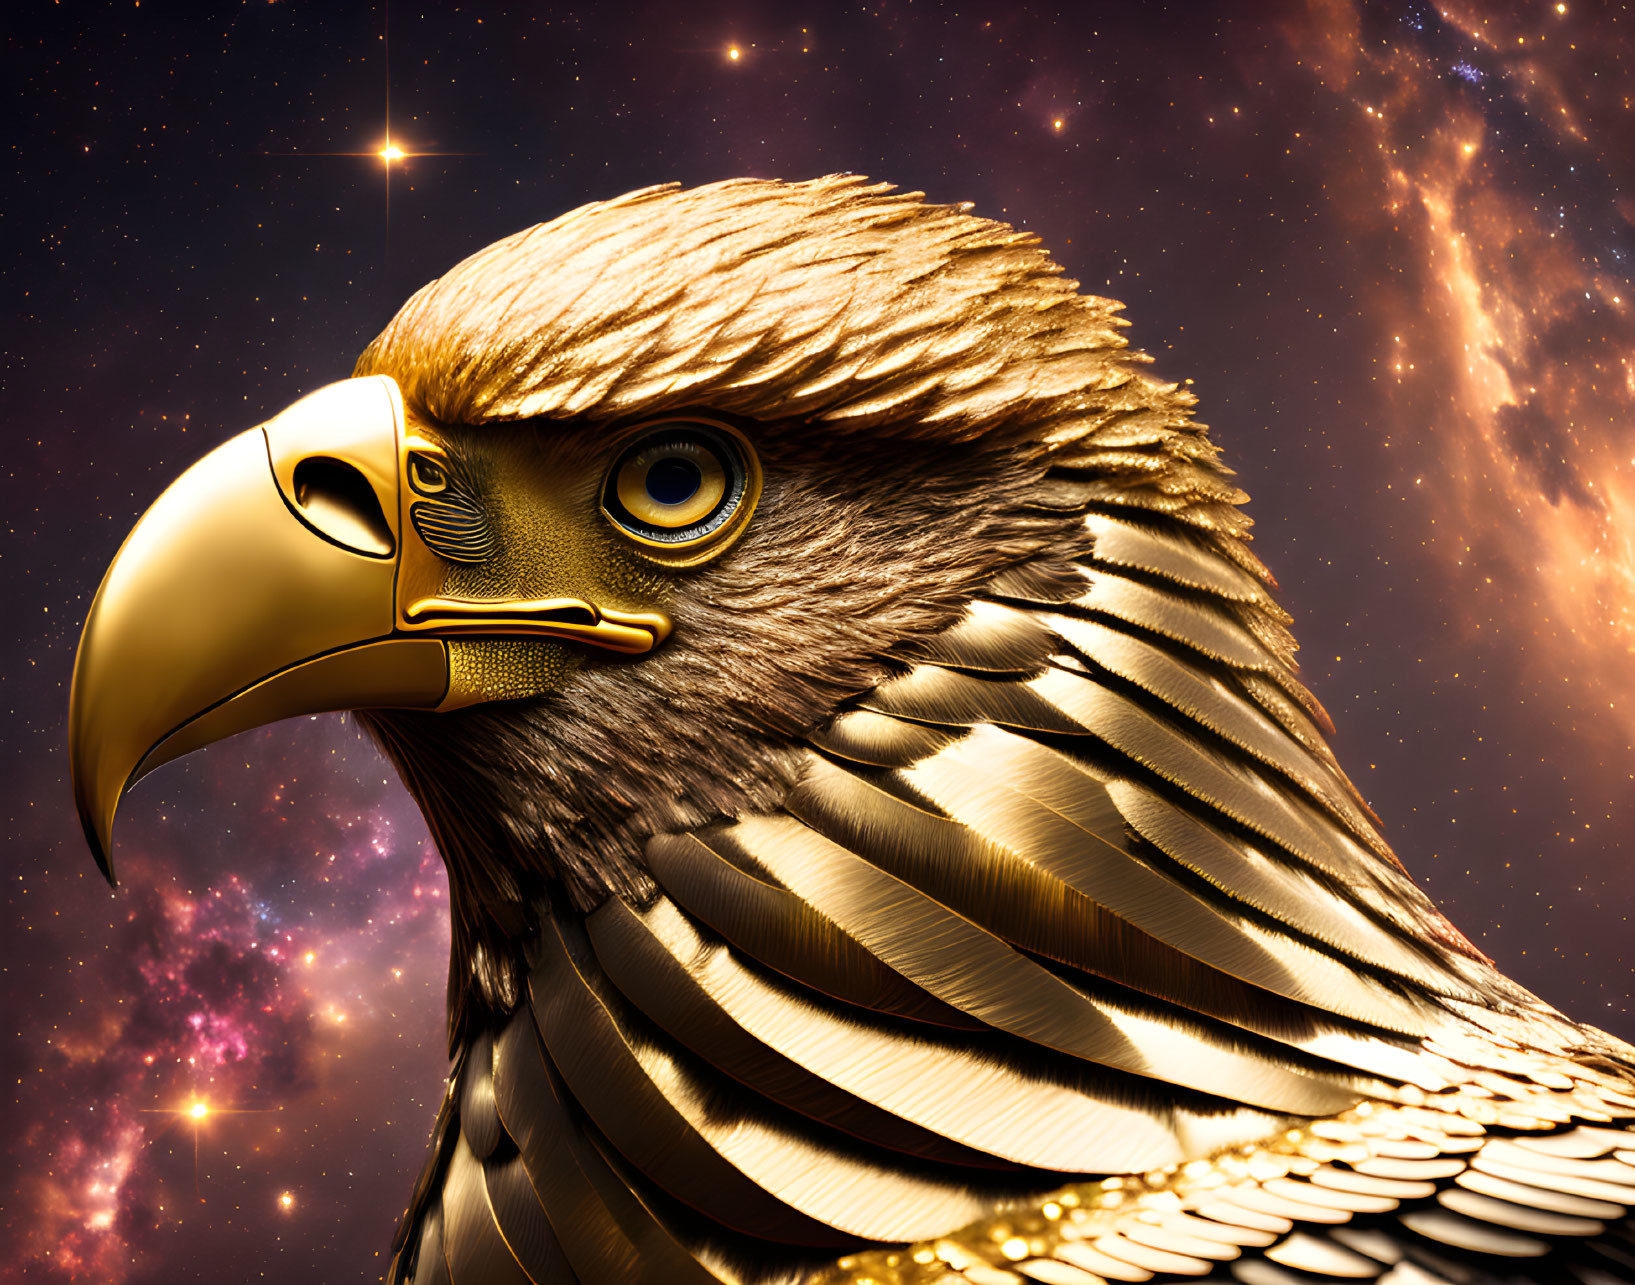 Detailed Golden Eagle Head on Starry Cosmic Background